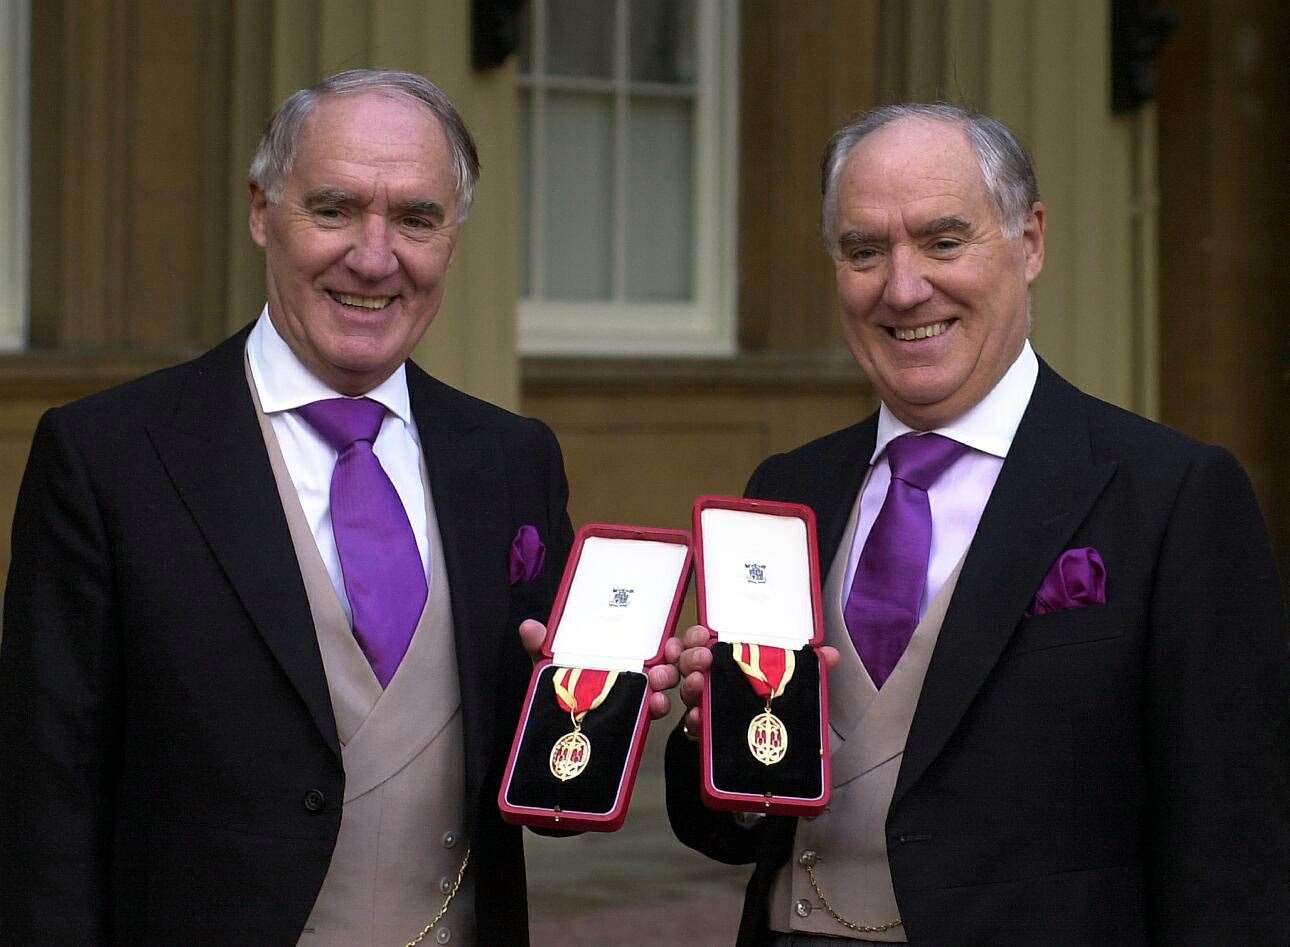 Sir Frederick Barclay, right, with his twin brother, Sir David Barclay, after they were knighted (Michael Stephens/PA)